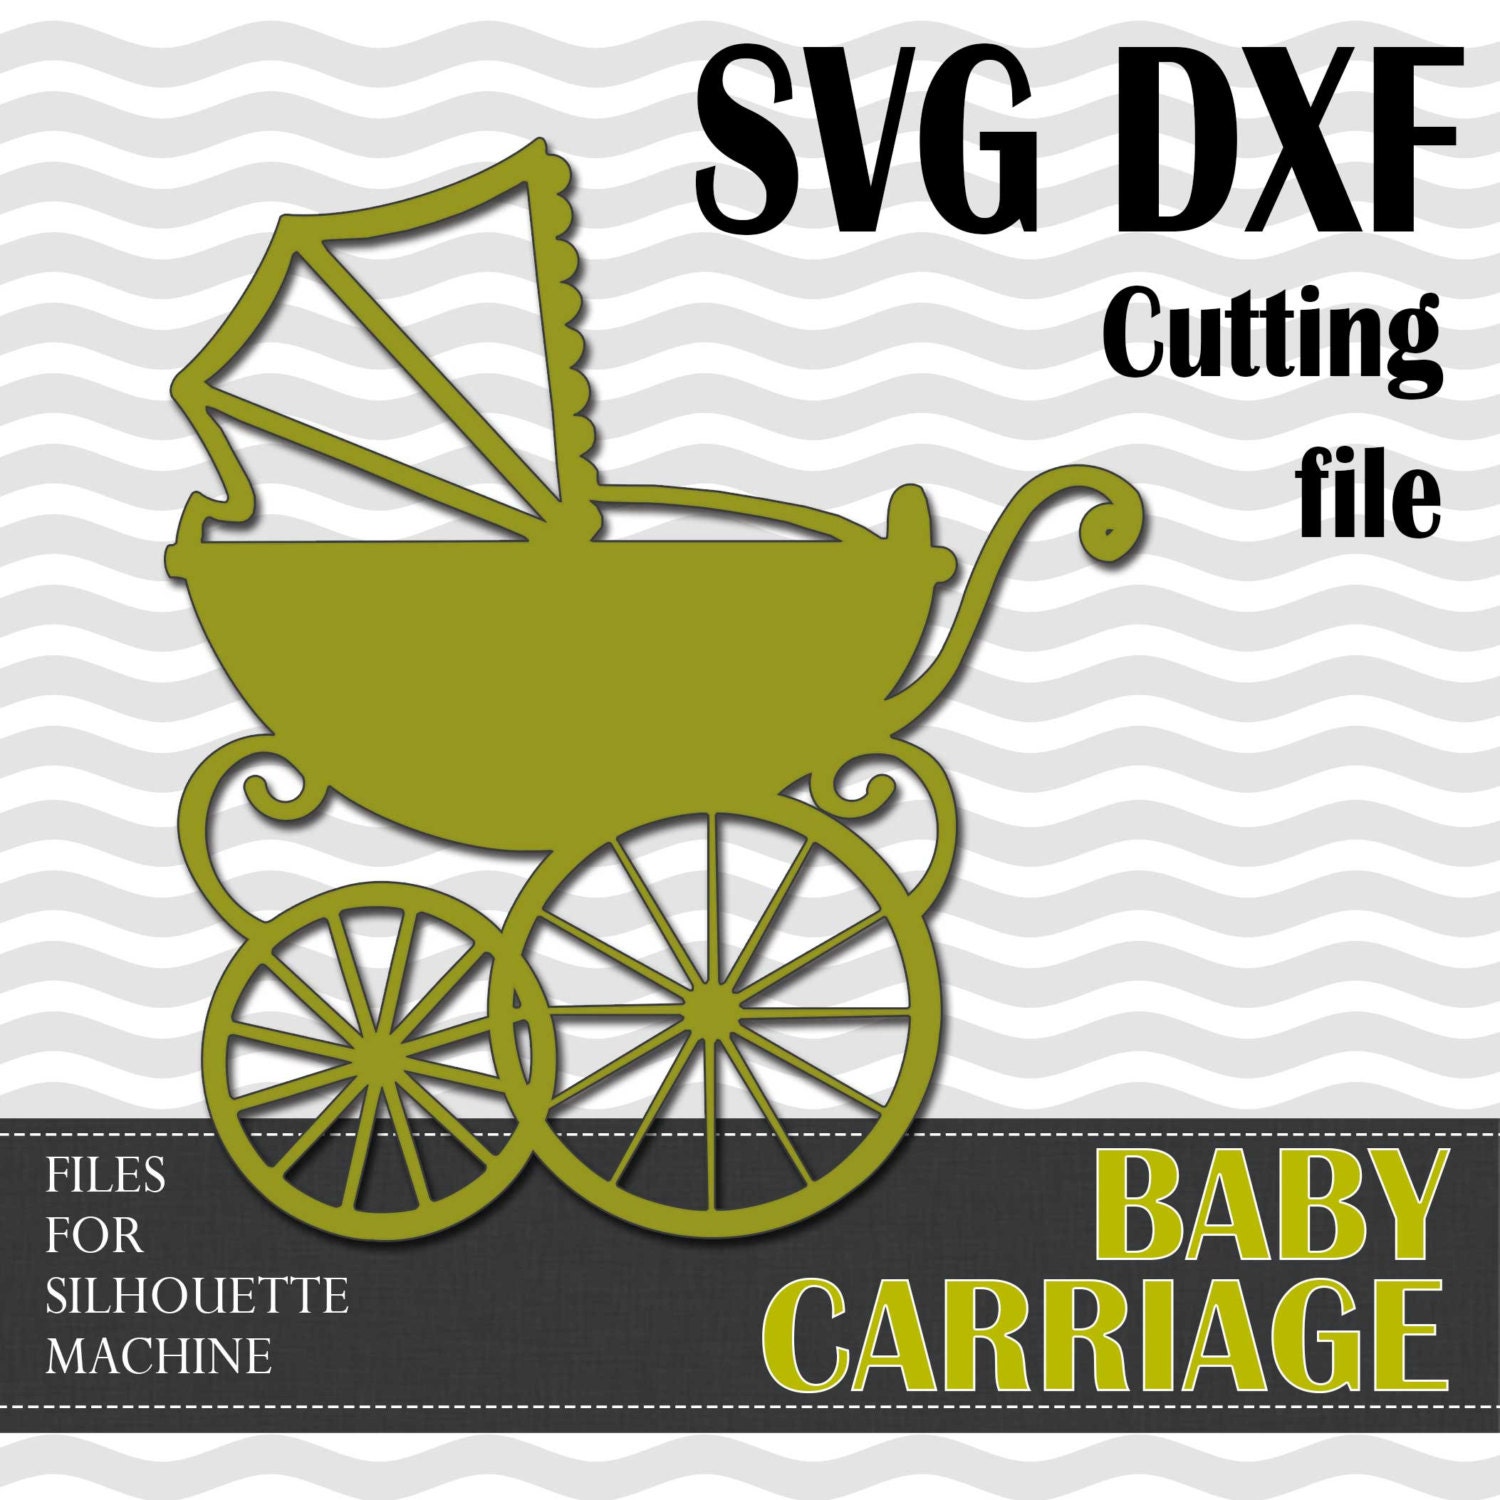 Baby carriage design SVG DXF vinyl cut files for use with